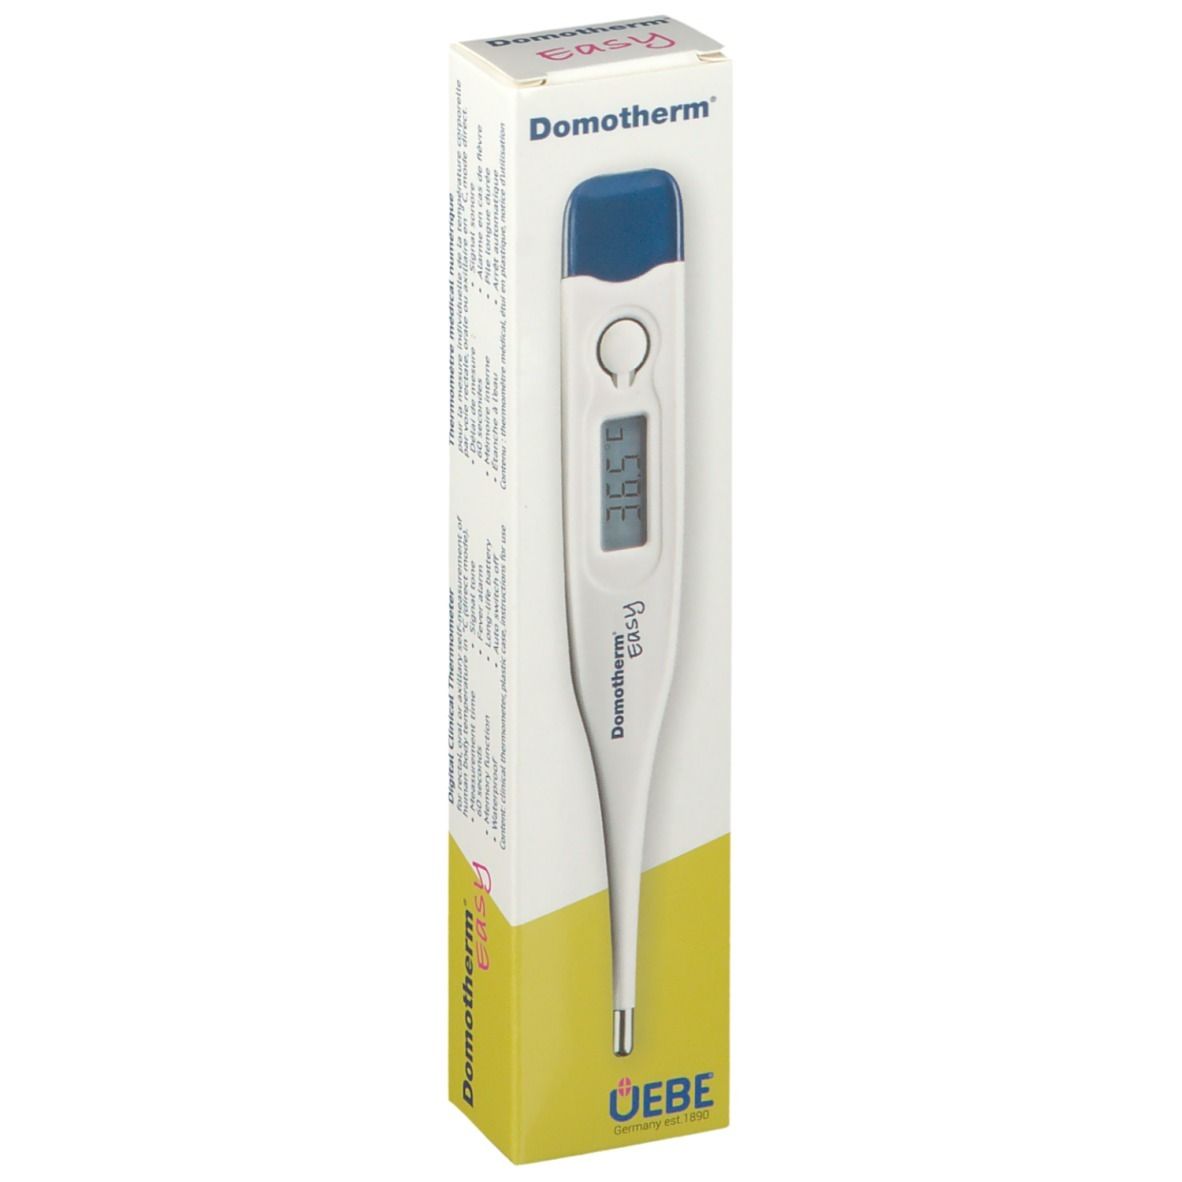 Domotherm® Easy digitales Fieberthermometer